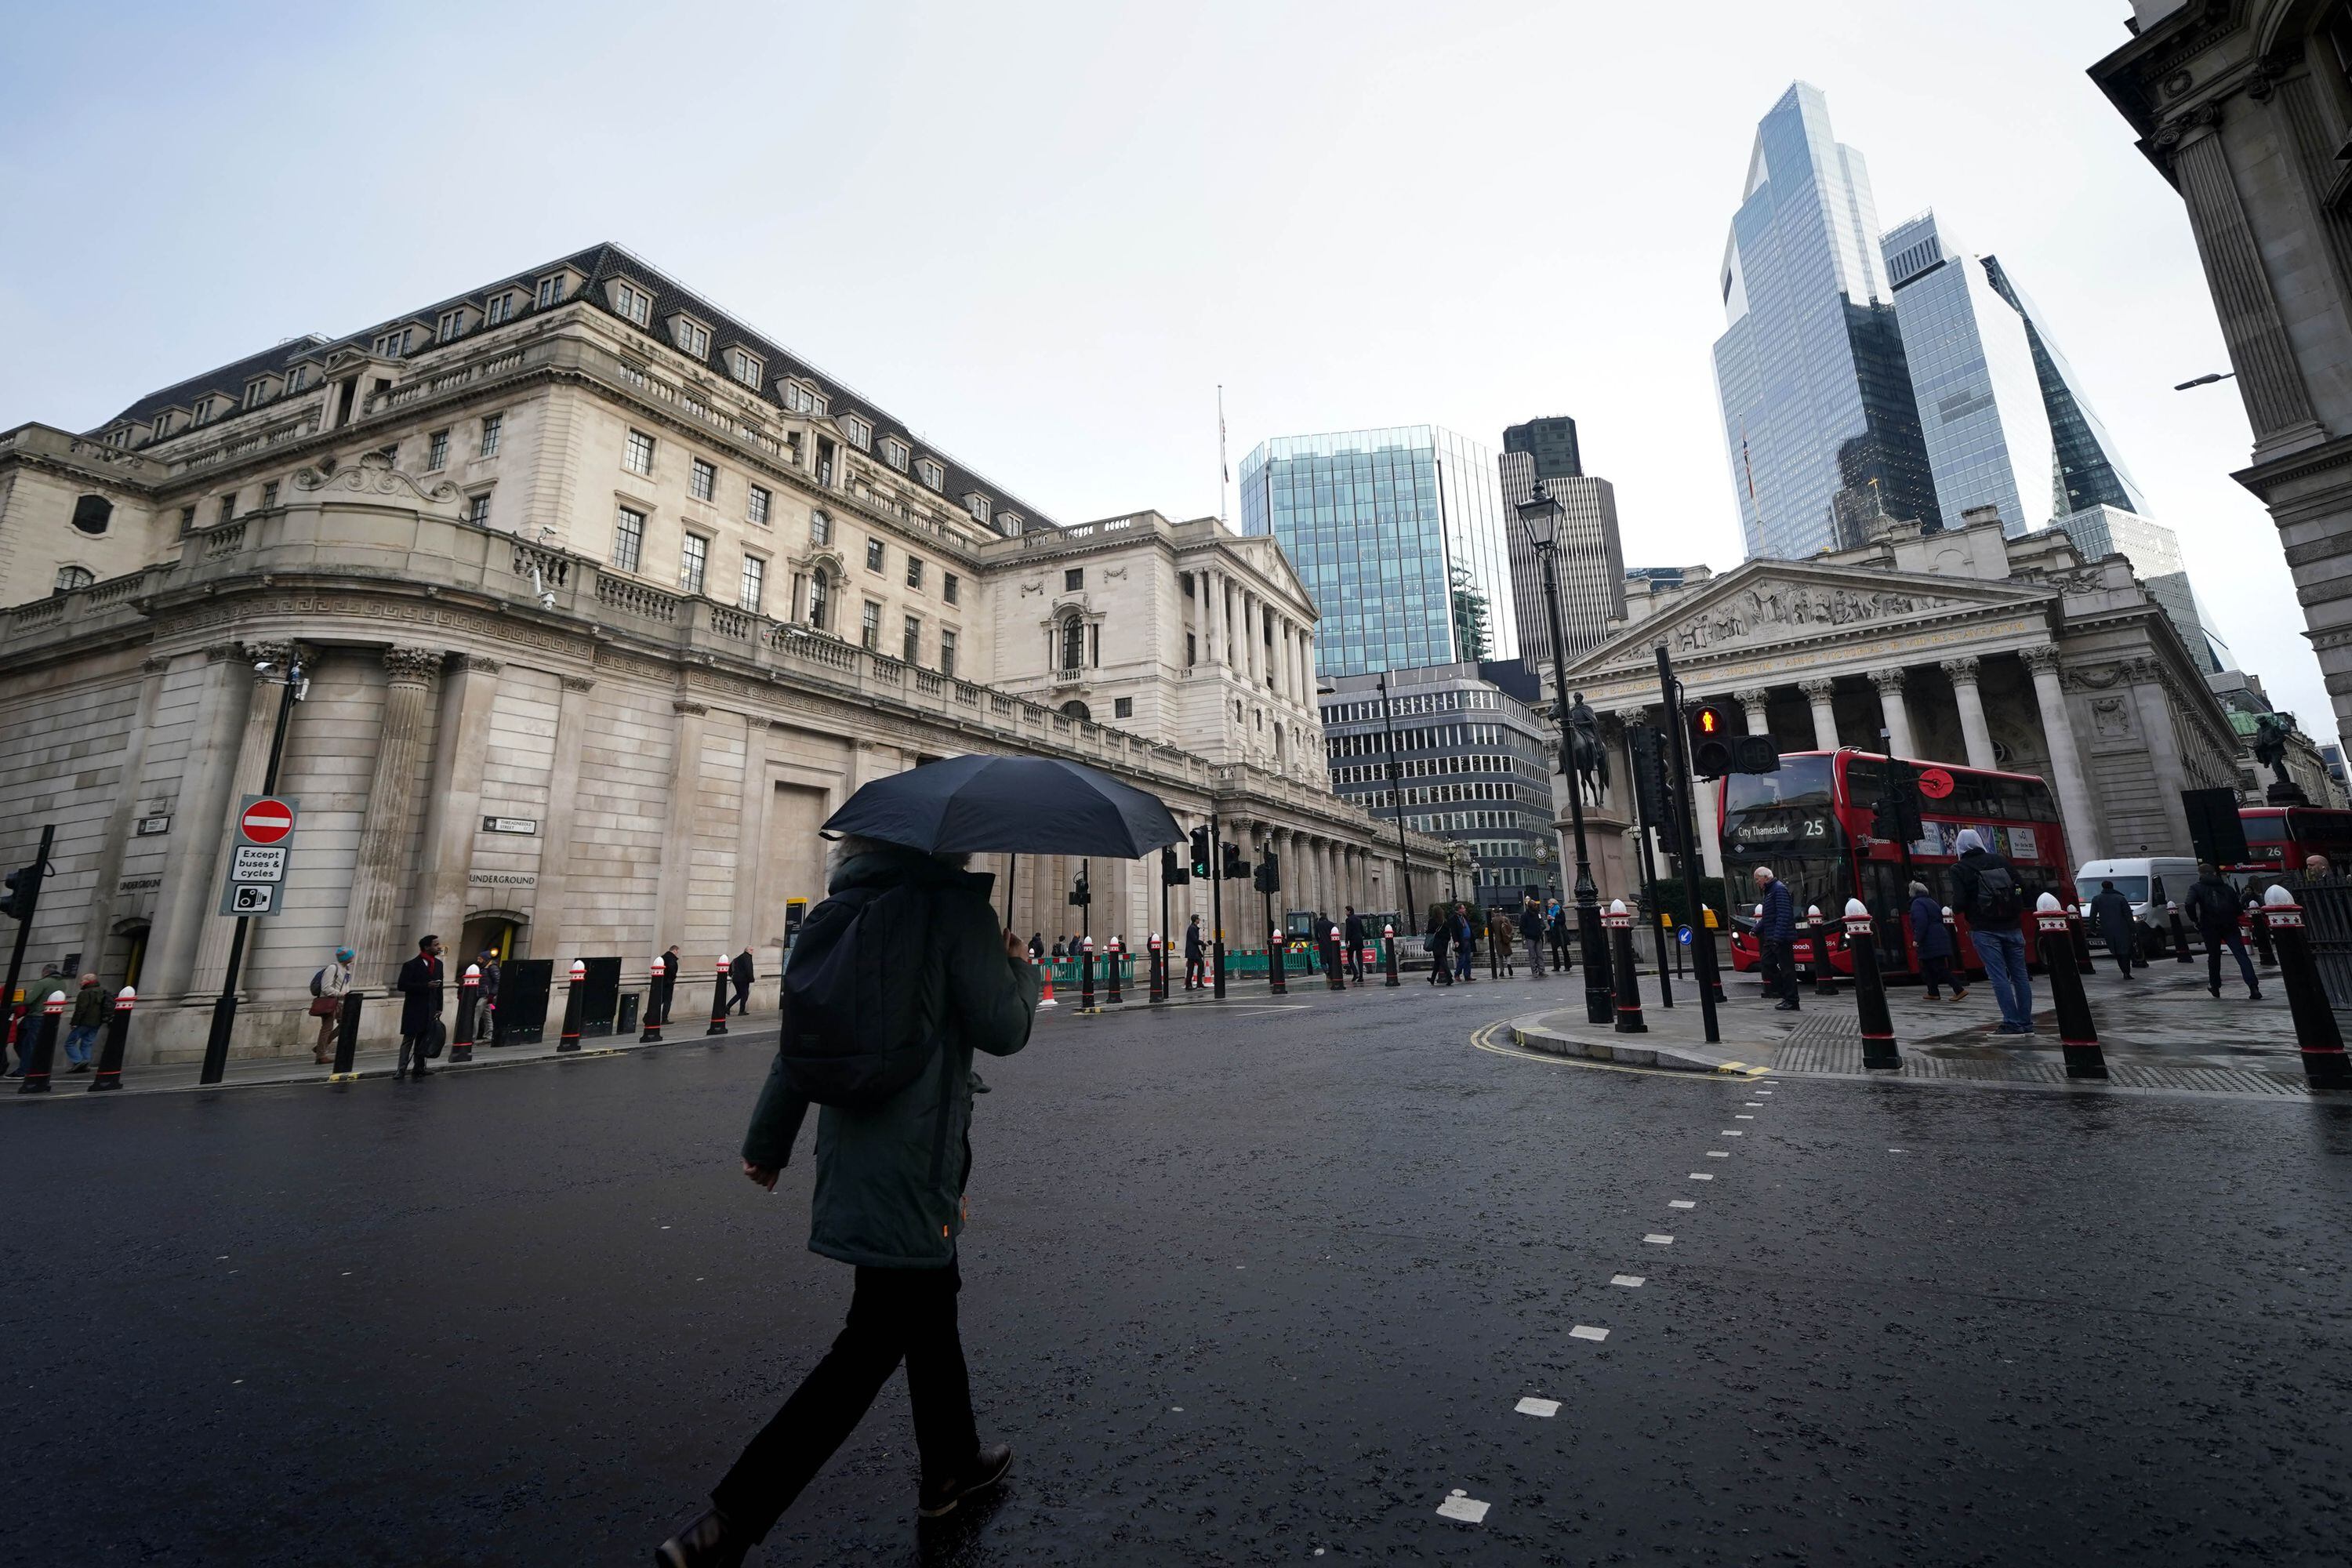 outmoded bank of england boss bailey given a lifeline with bernanke's 12-point plan